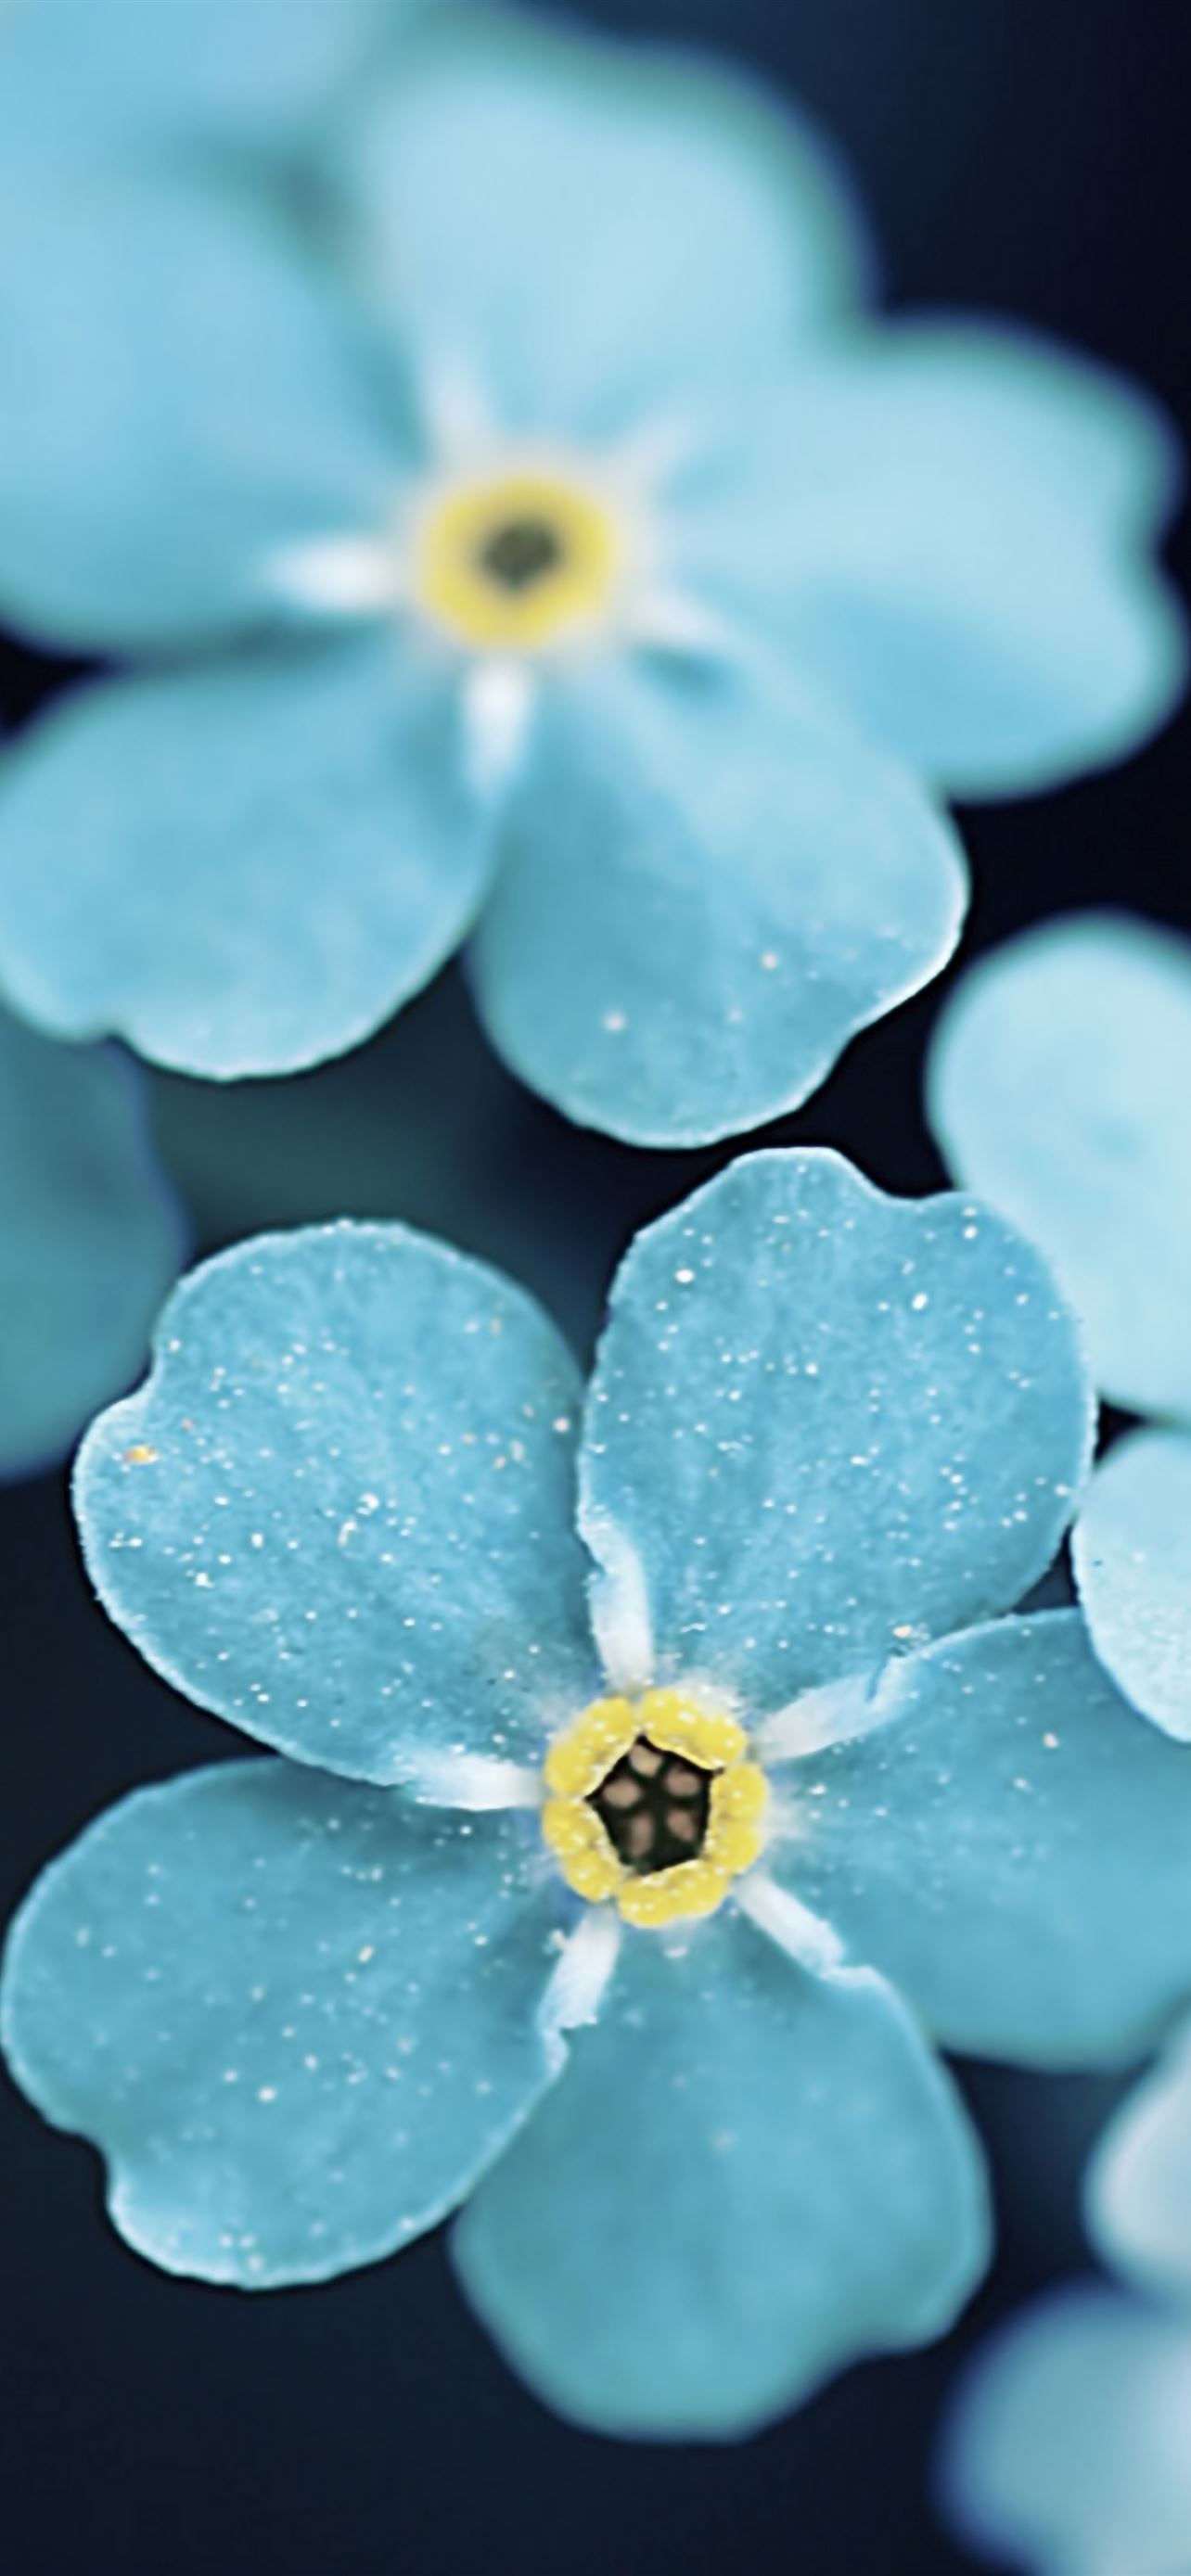 Forget Me Blue Flowers iPhone Wallpaper Free Download